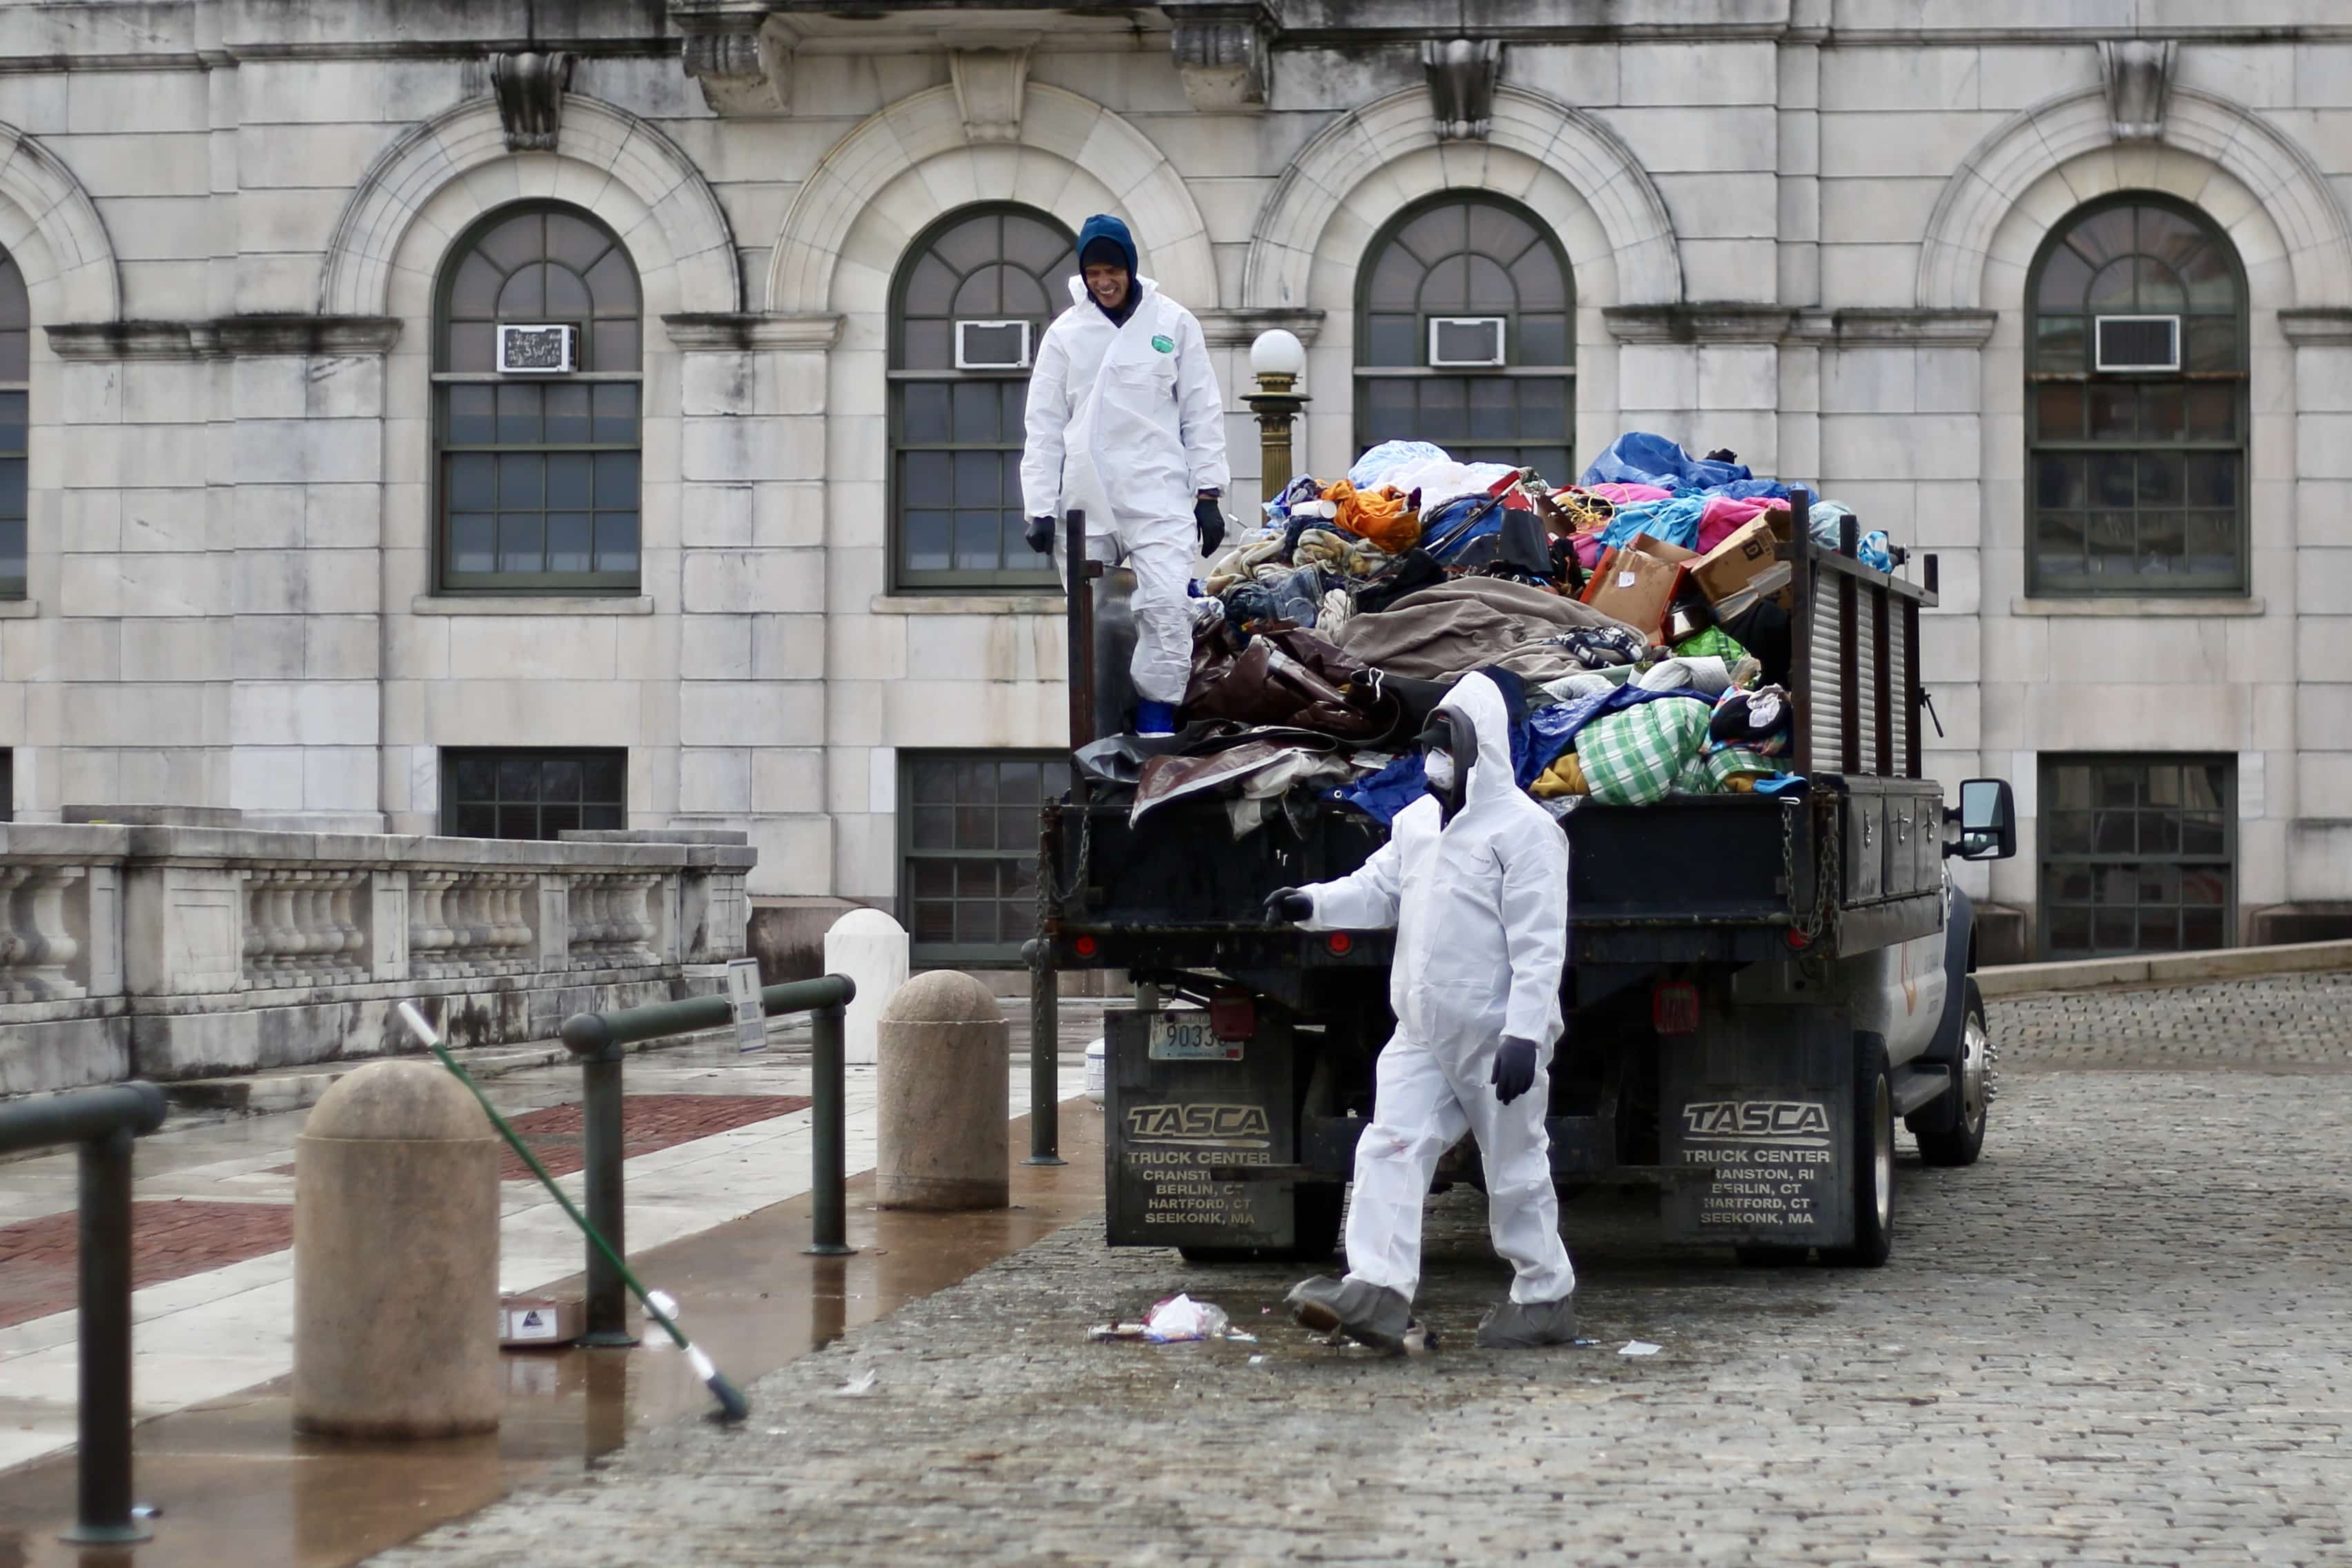 Rhode Island: State House plaza homeless encampment cleared by Governor McKee